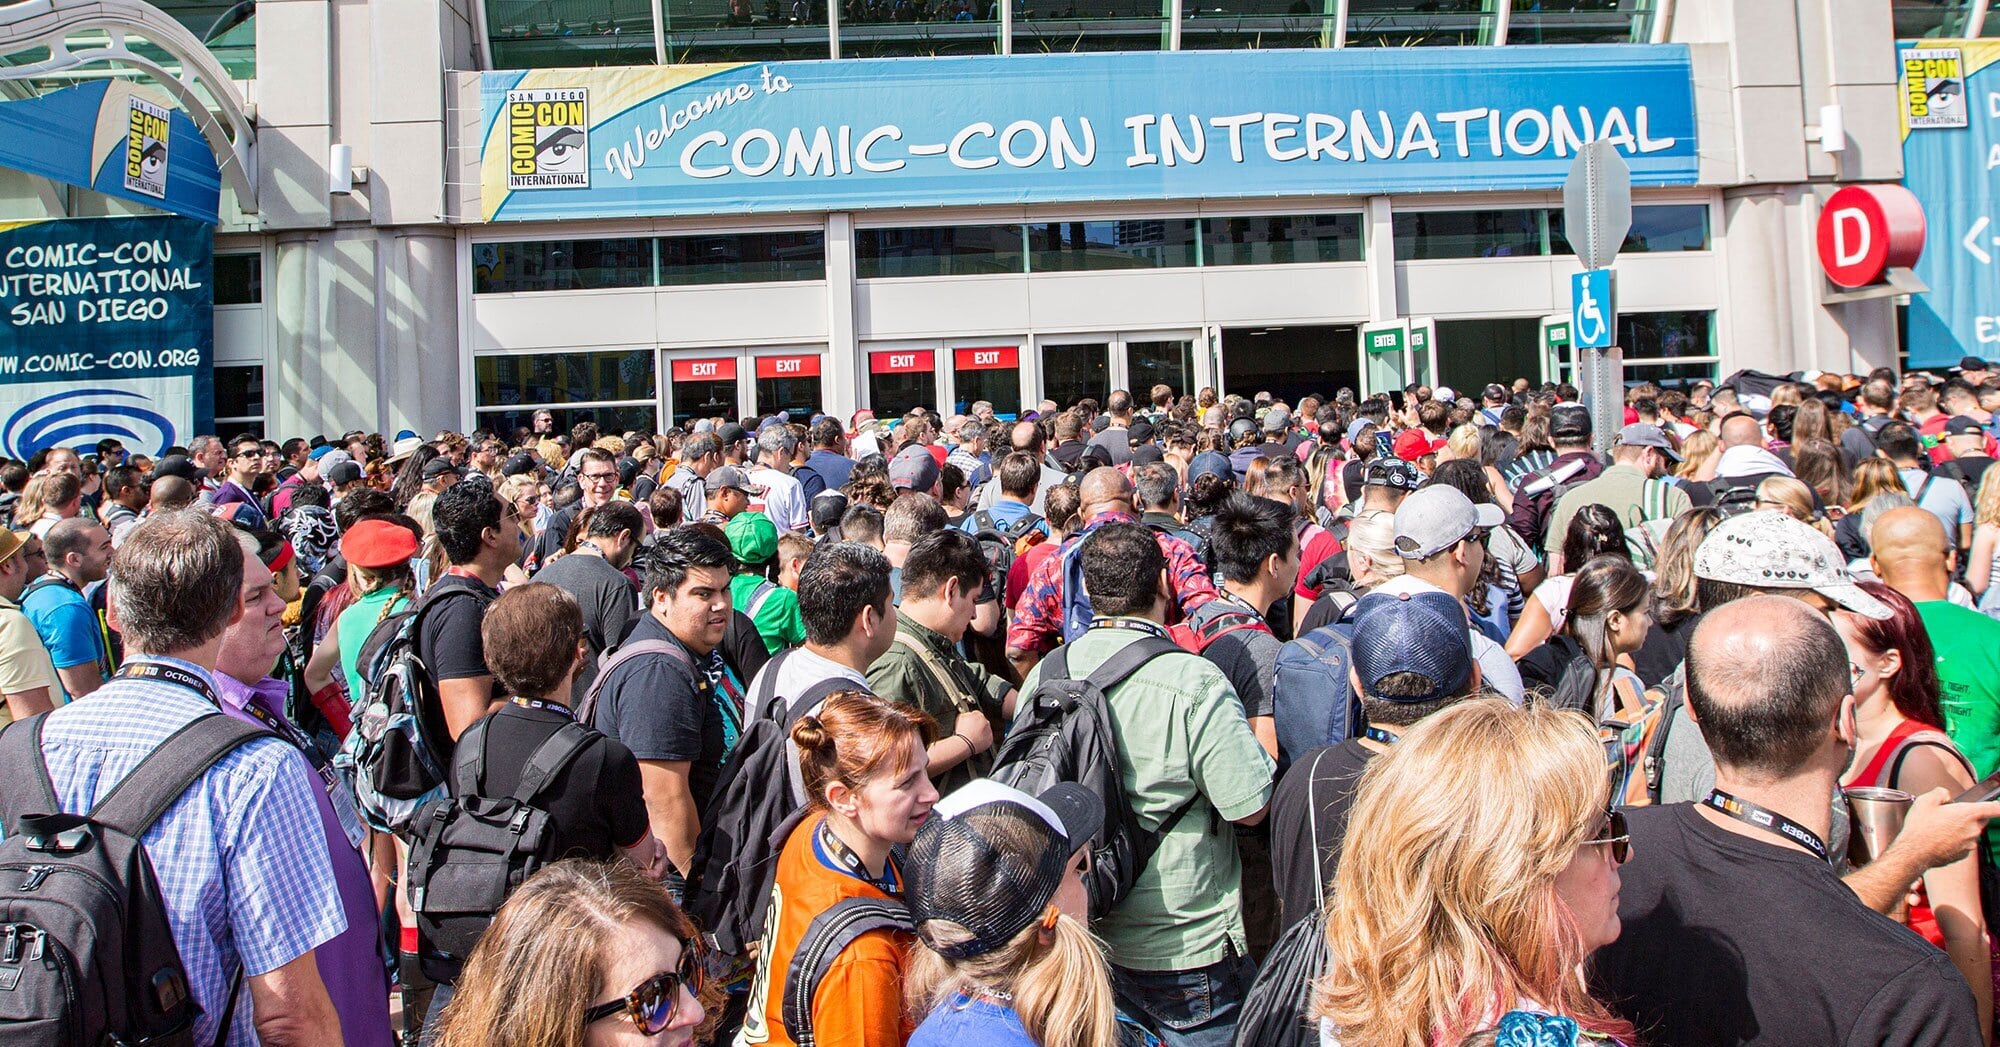 Attendees at the San Diego Comic-Con